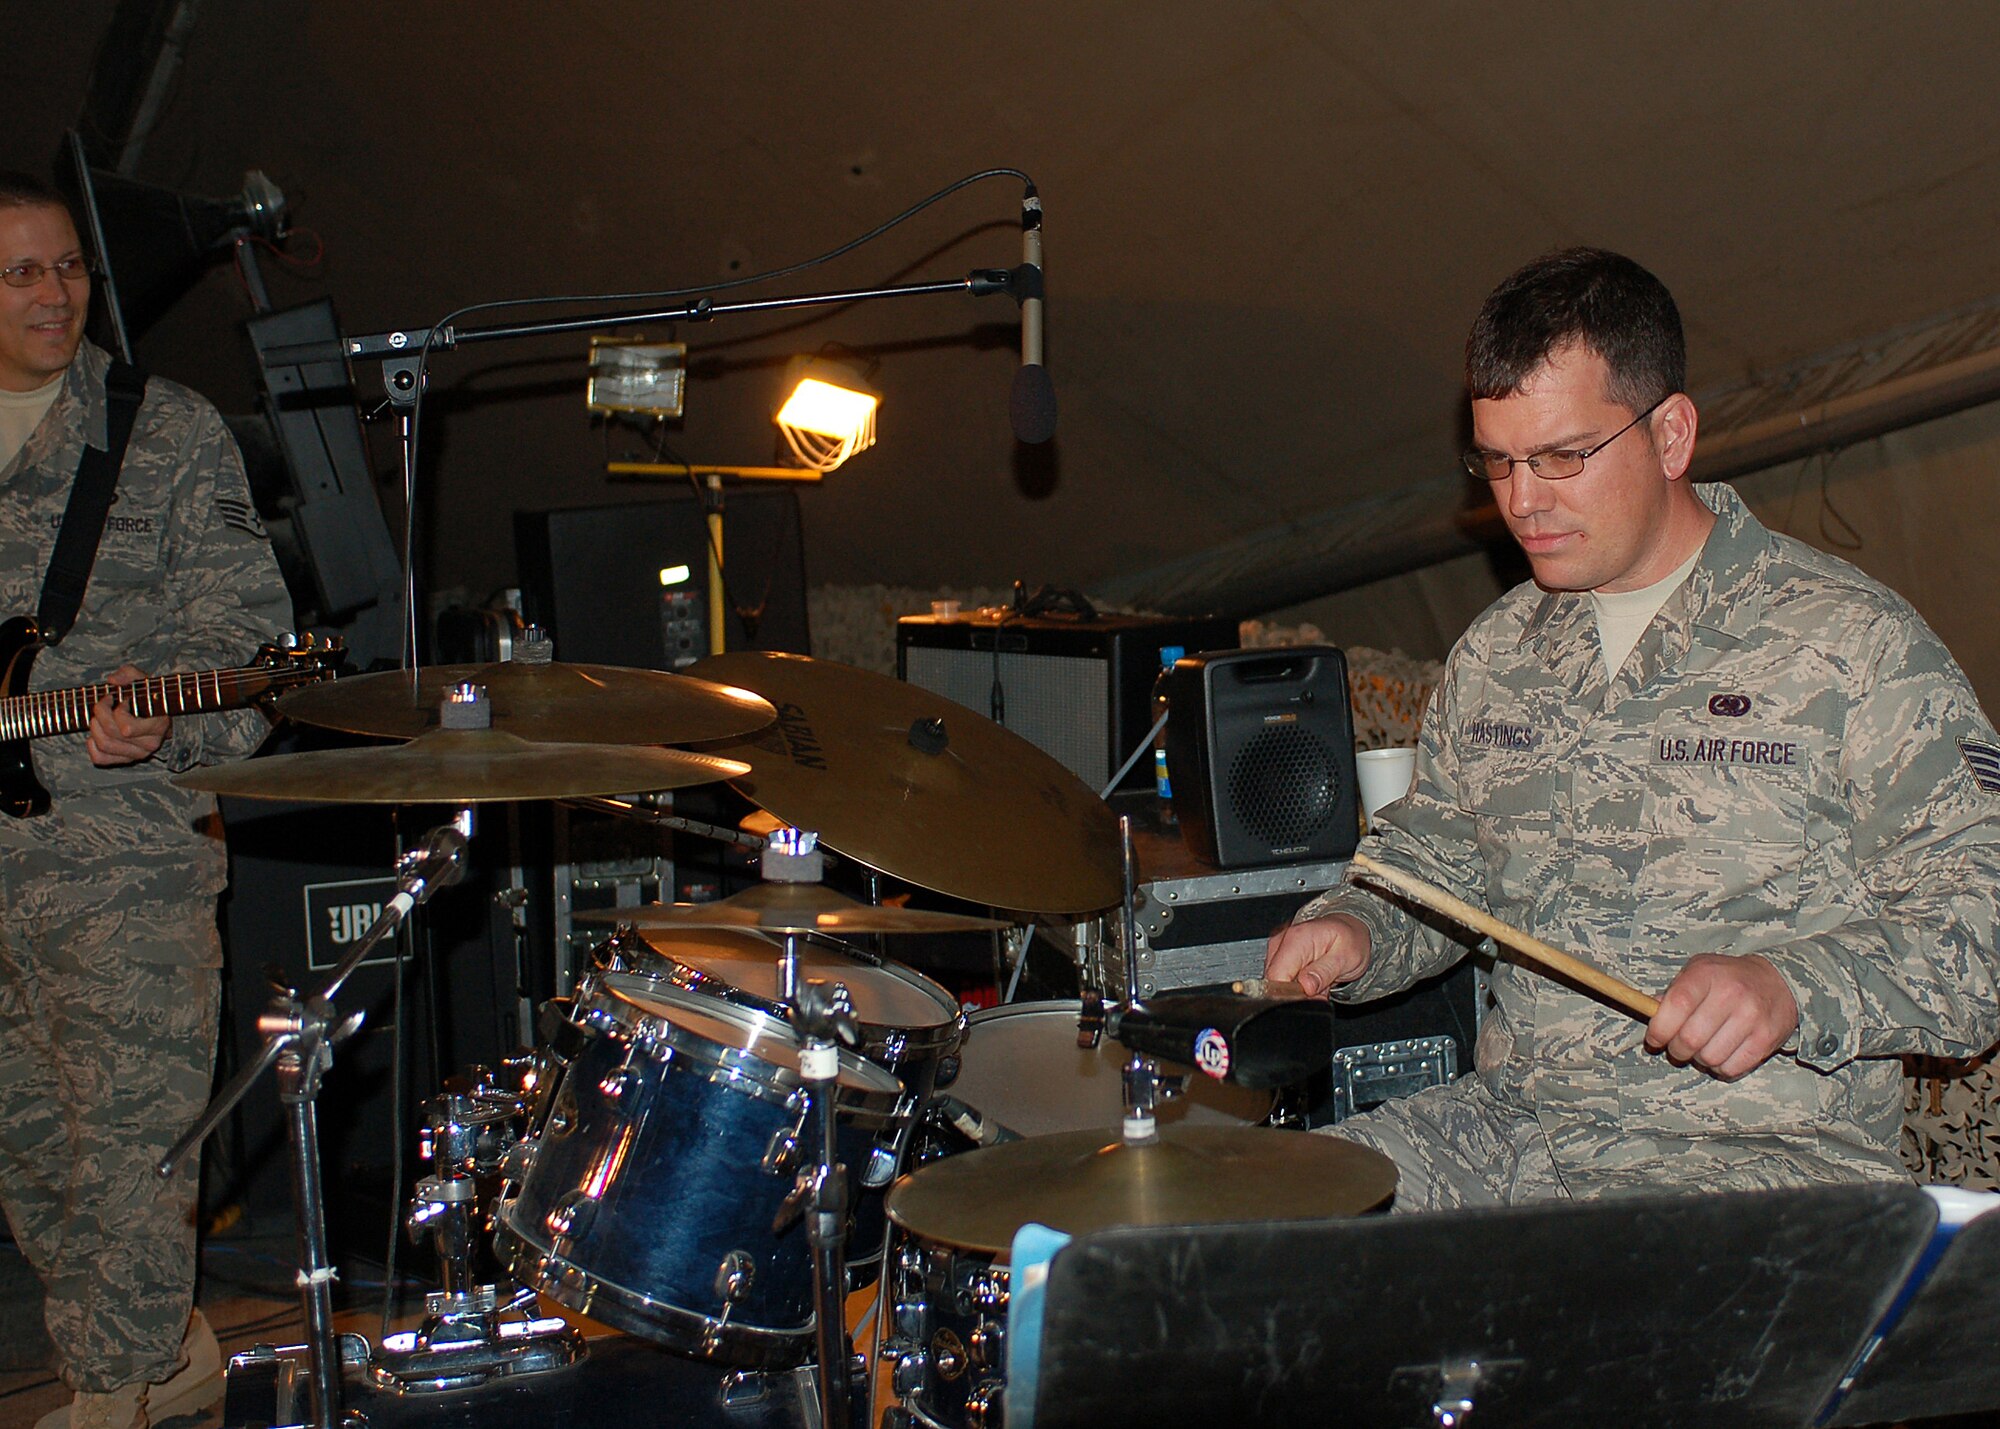 Staff Sgt. Jeremy Hastings shows off his drumming skills as a guest performer with the band Sirocco, the U.S. Air Forces Central Expeditionary Band, during their final performance at Manas Air Base, Kyrgyzstan, March 21, before heading back to Southwest Asia. Sergeant Hastings is assigned to the 376th Expeditionary Logistics Readiness Squadron. He is an Alabama Air National Guardman deployed from the 187th Fighter Wing at Dannelley Field in Montgomery. (U.S. Air Force photo/Tech. Sgt. Elizabeth Weinberg)